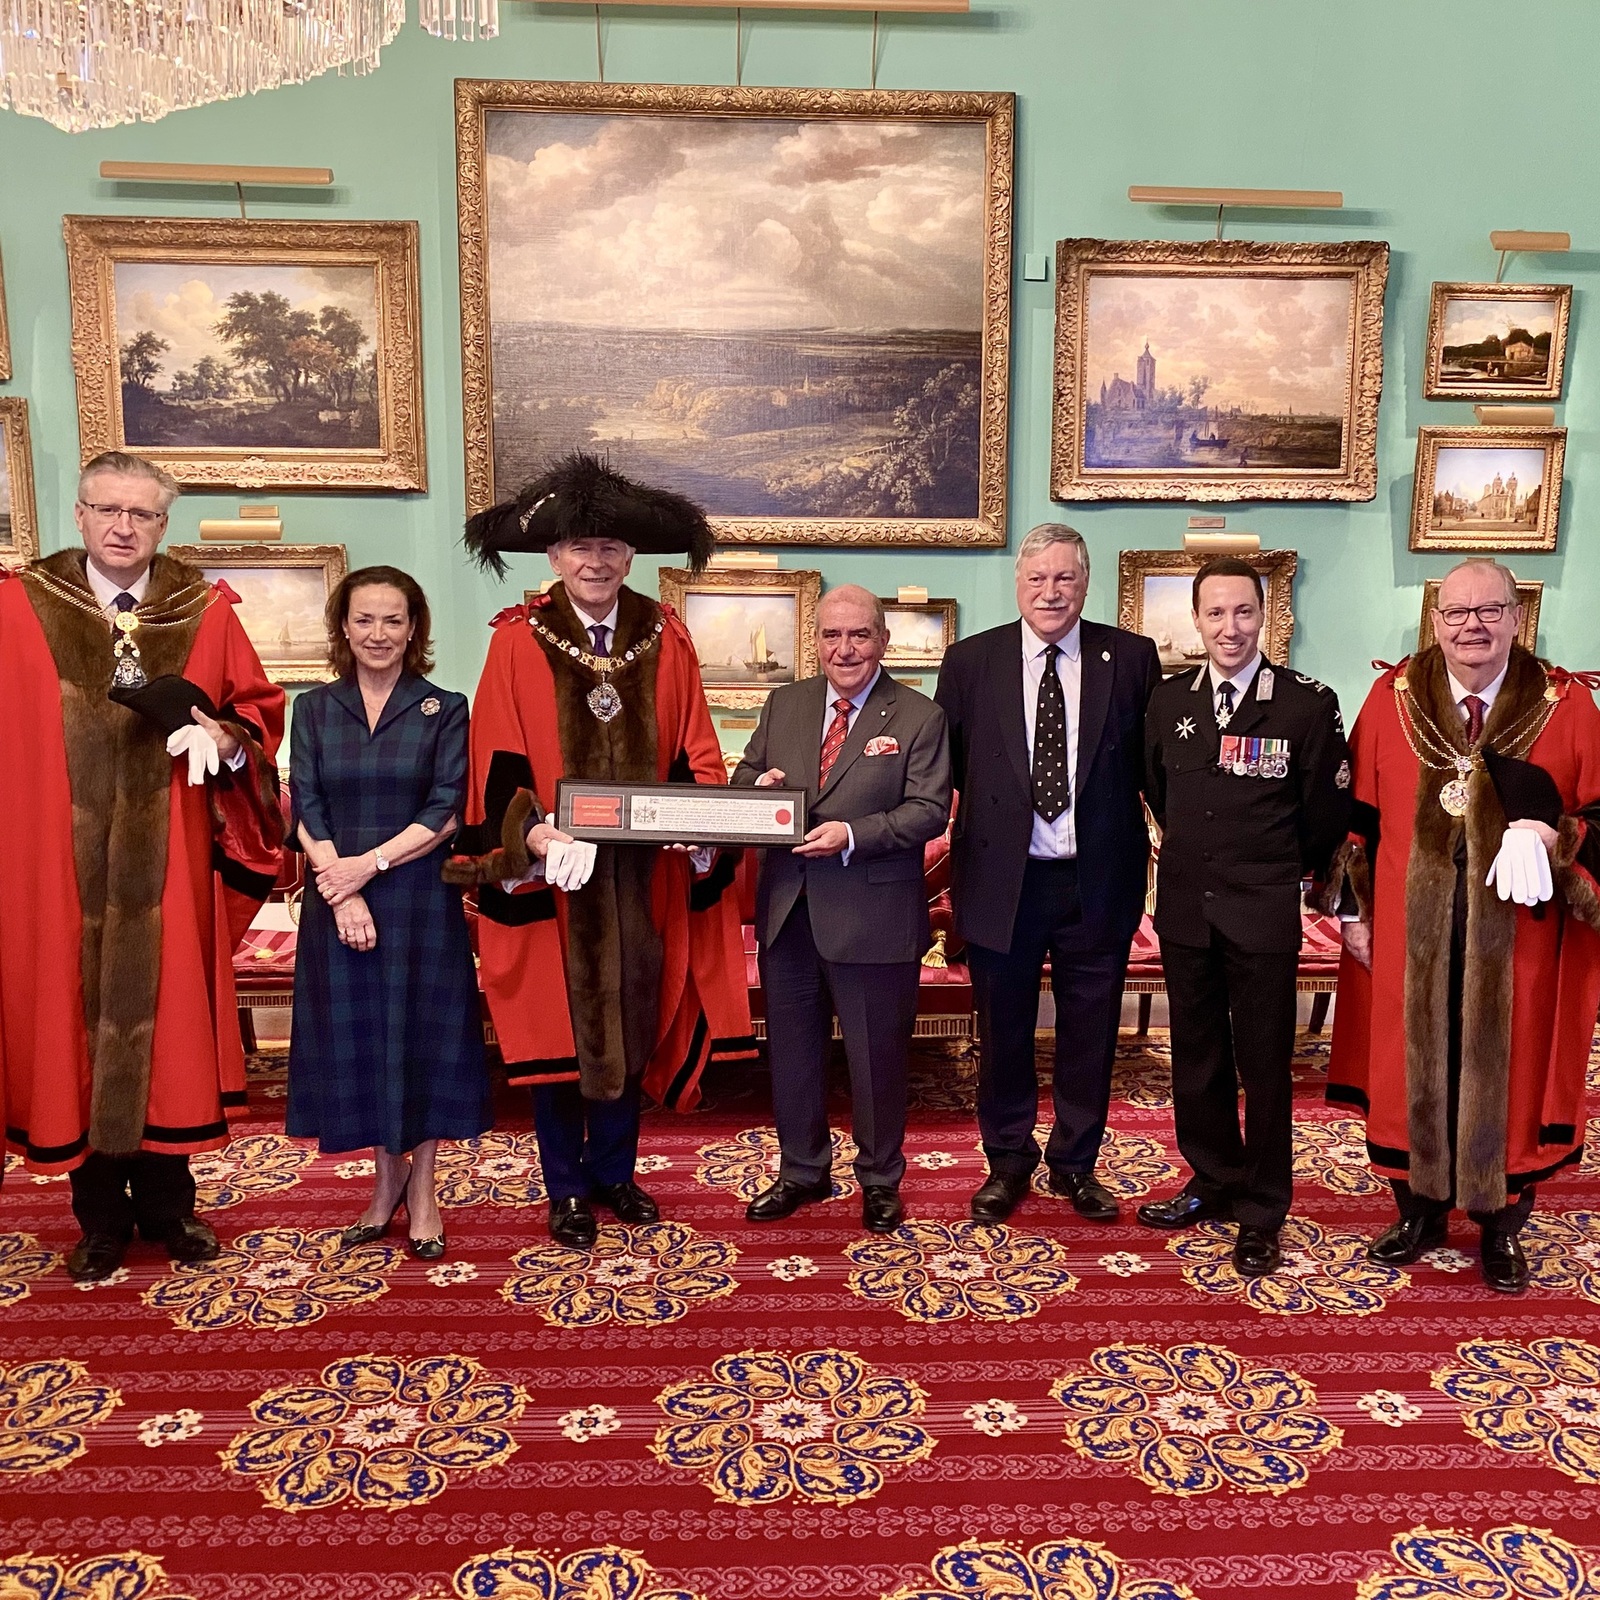 9 Dec 22 - The Freedom ceremony for Professor Mark Compton, Prior of The Order of St John